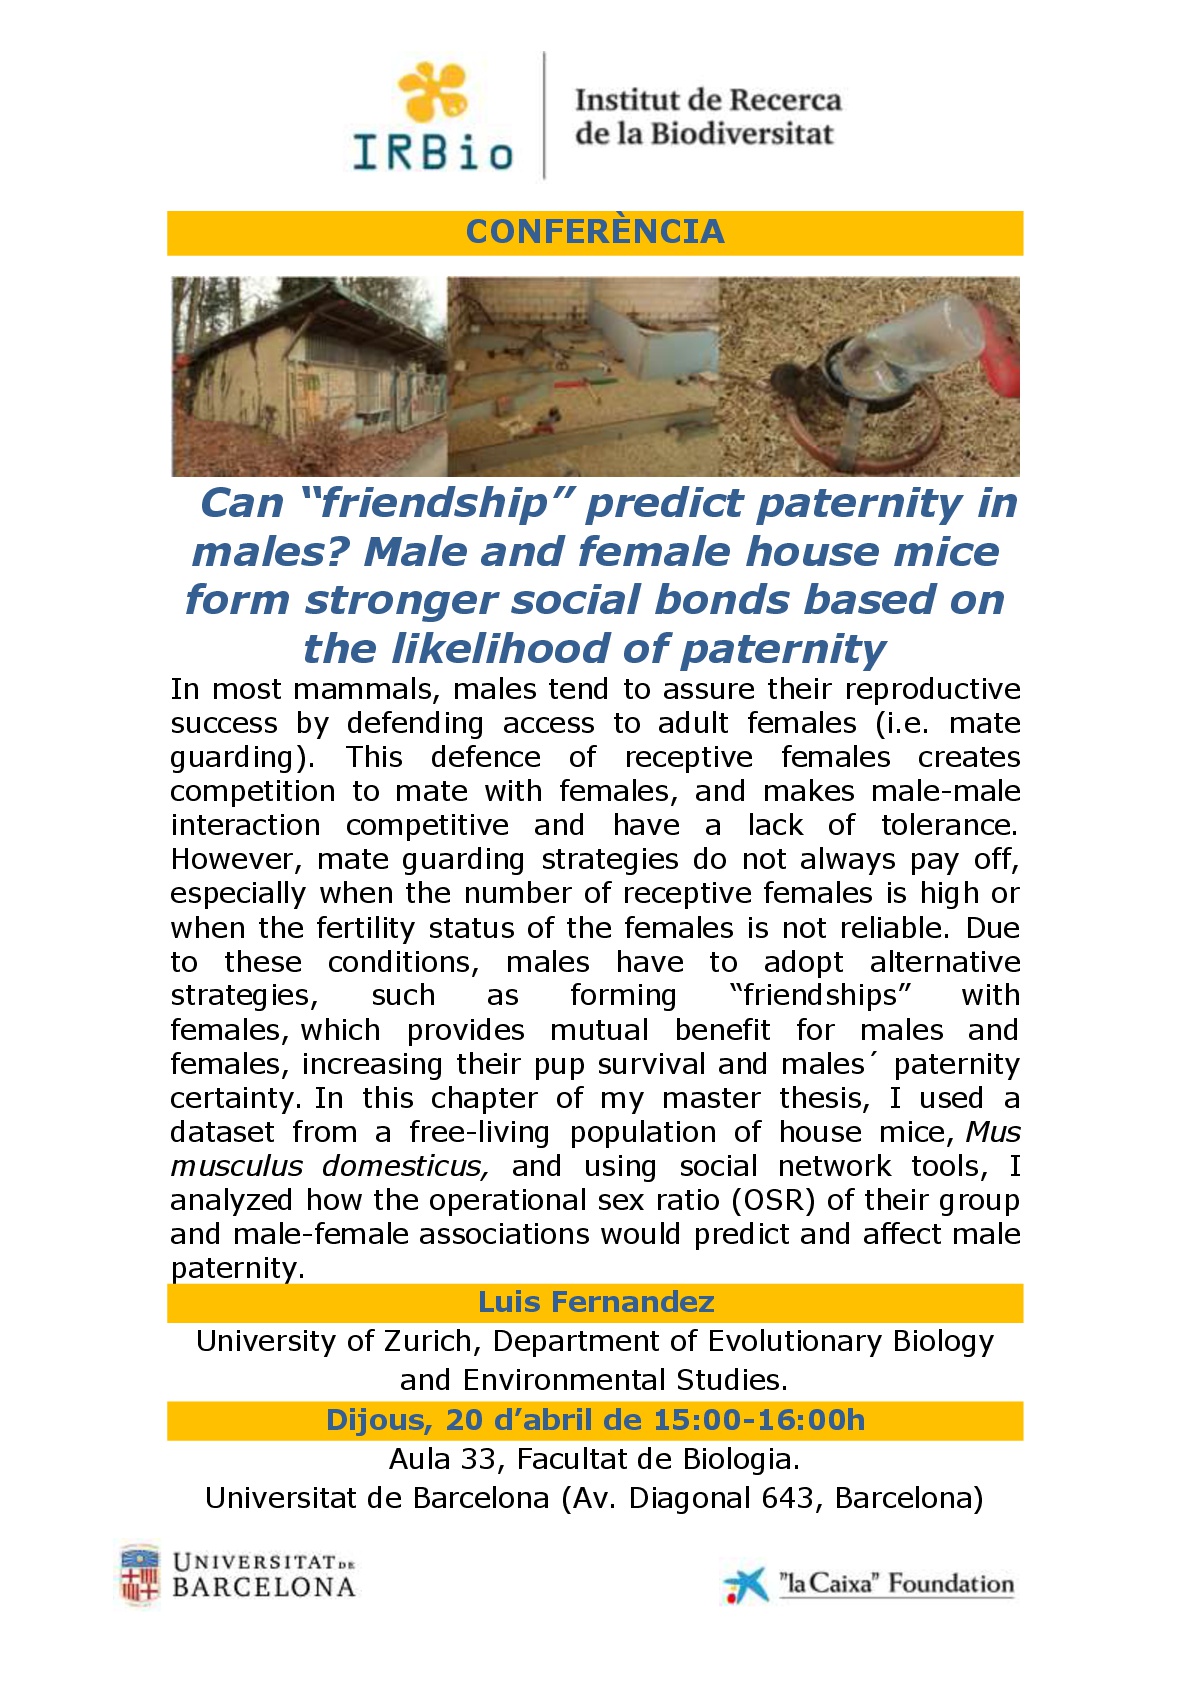 Can “friendship” predict paternity in males?